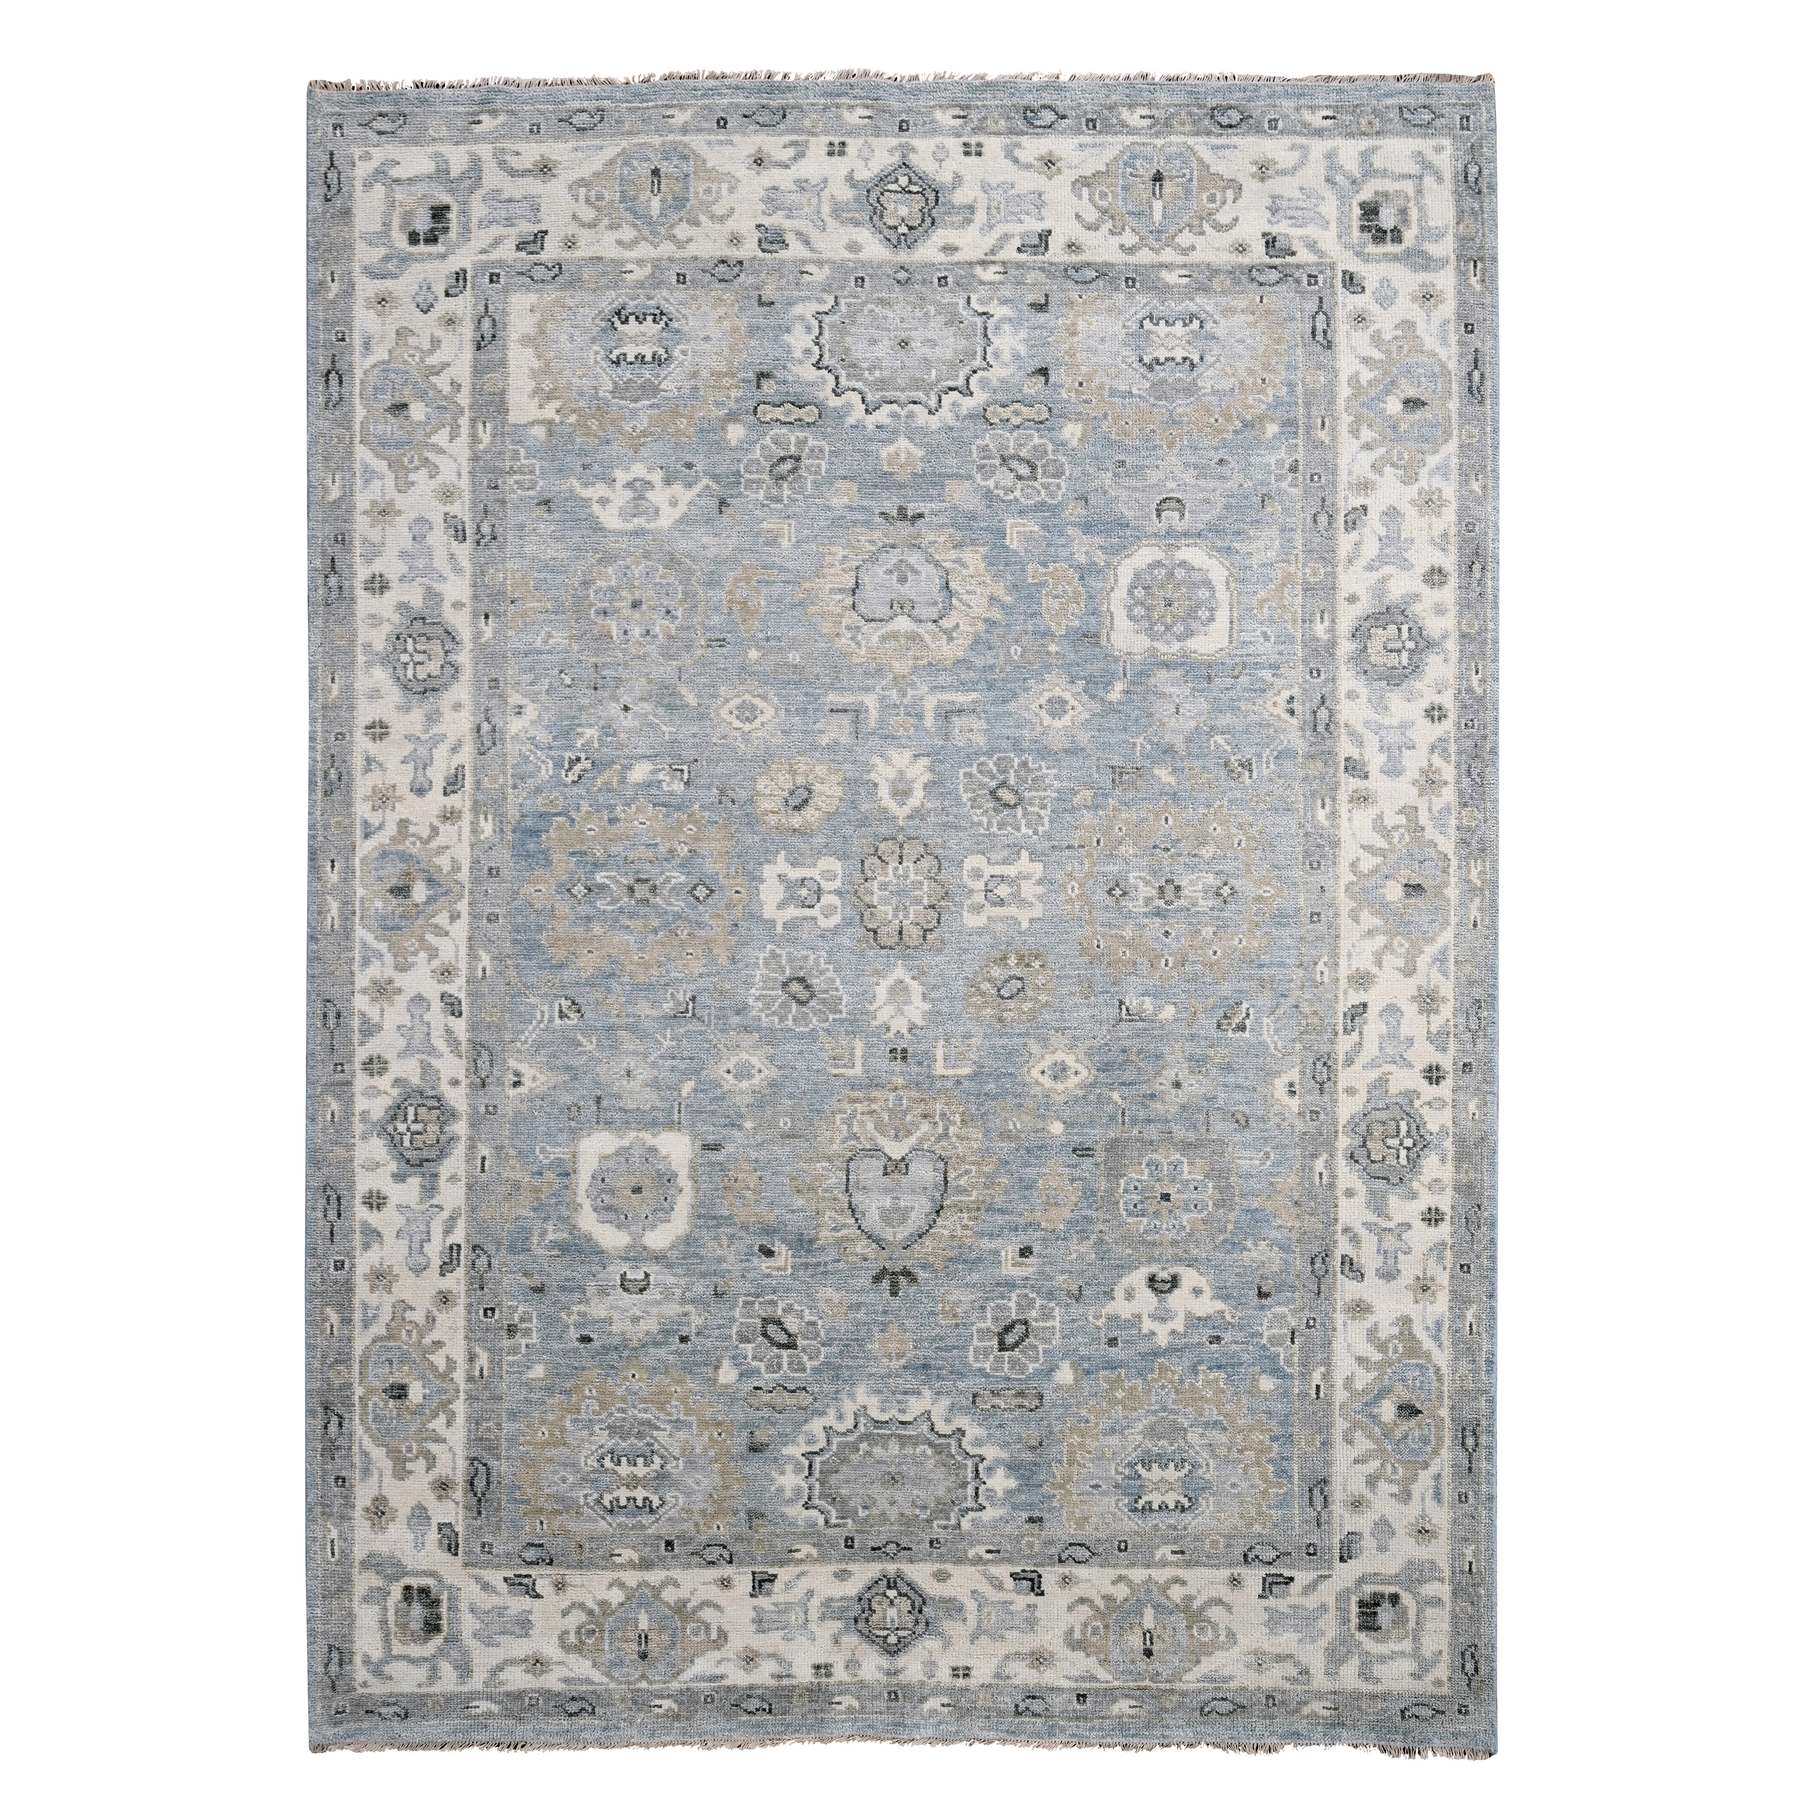 Adrift Blue With Swiss Coffee White, Hand Knotted Supple Collection Oushak Design, Vibrant Wool, Soft To The Touch Pile, Oriental Rug